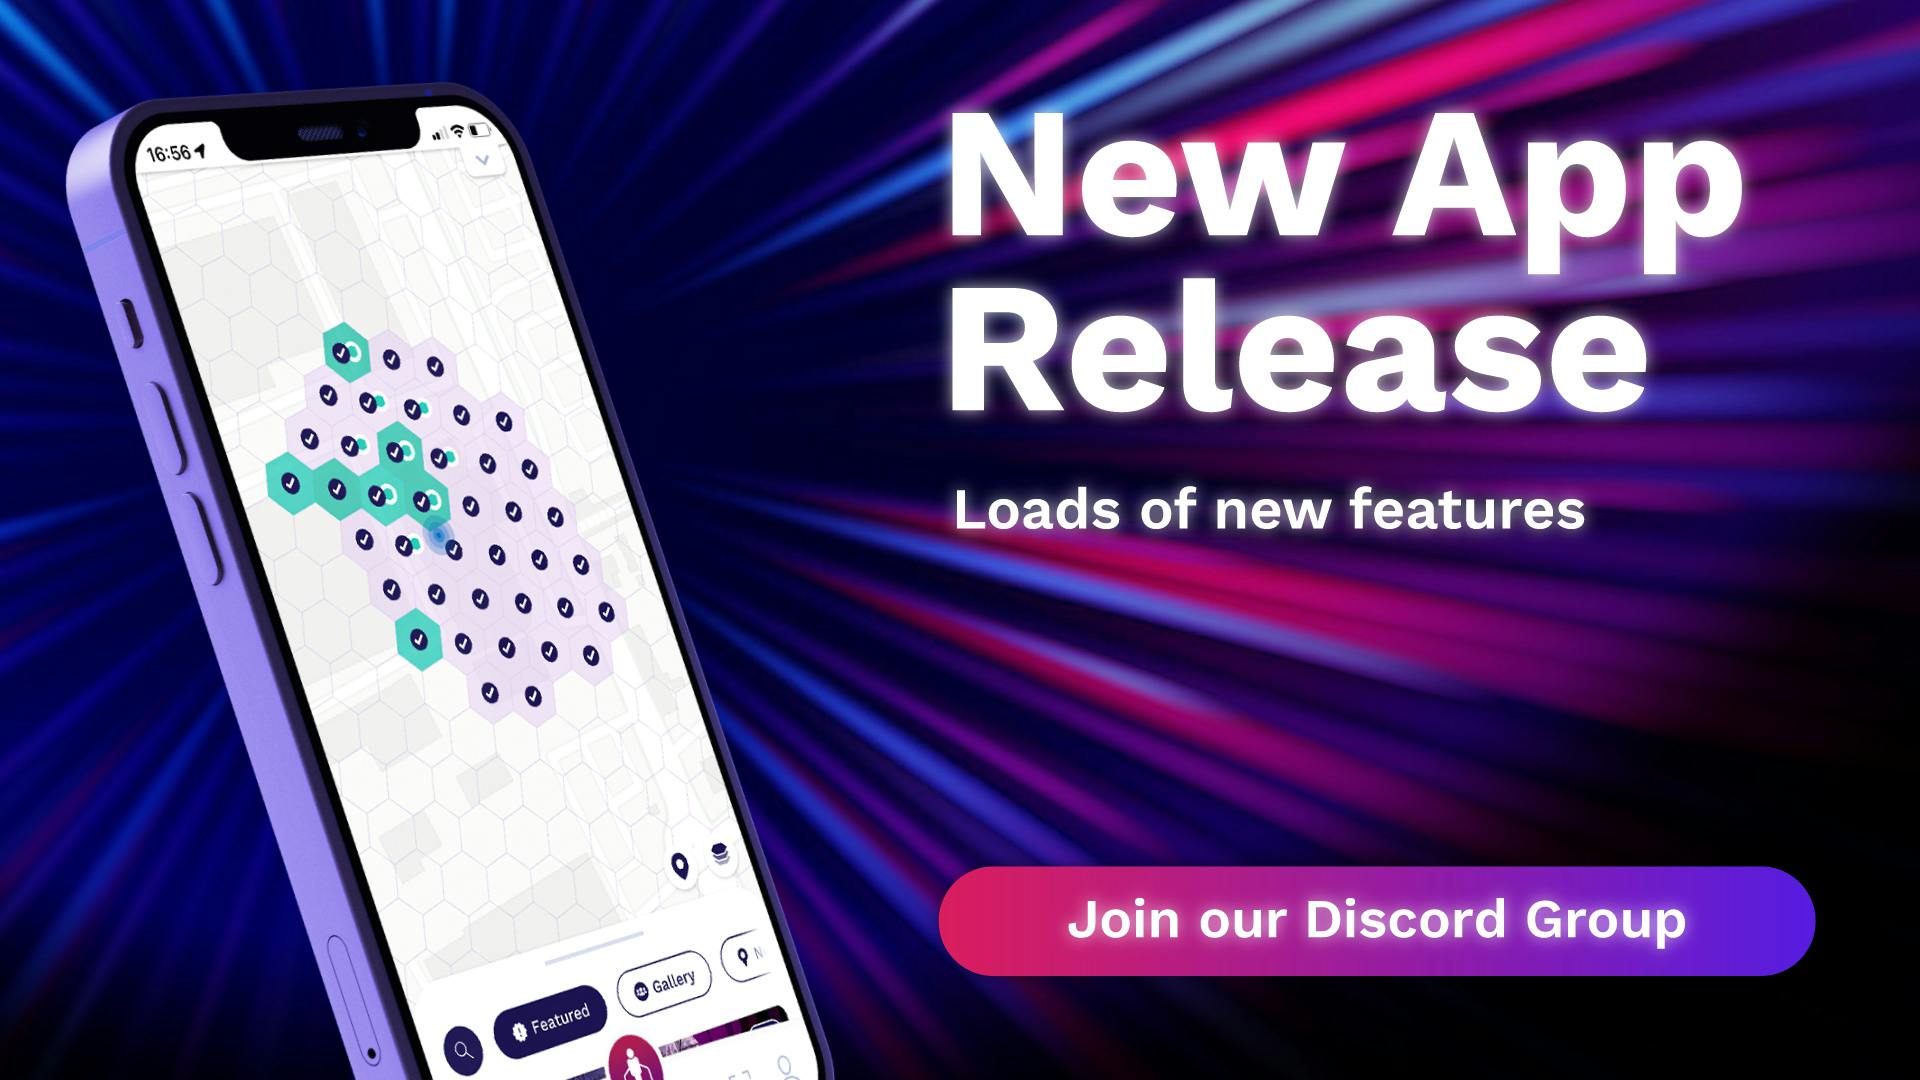 OVER App Release: discover the features and try them all!